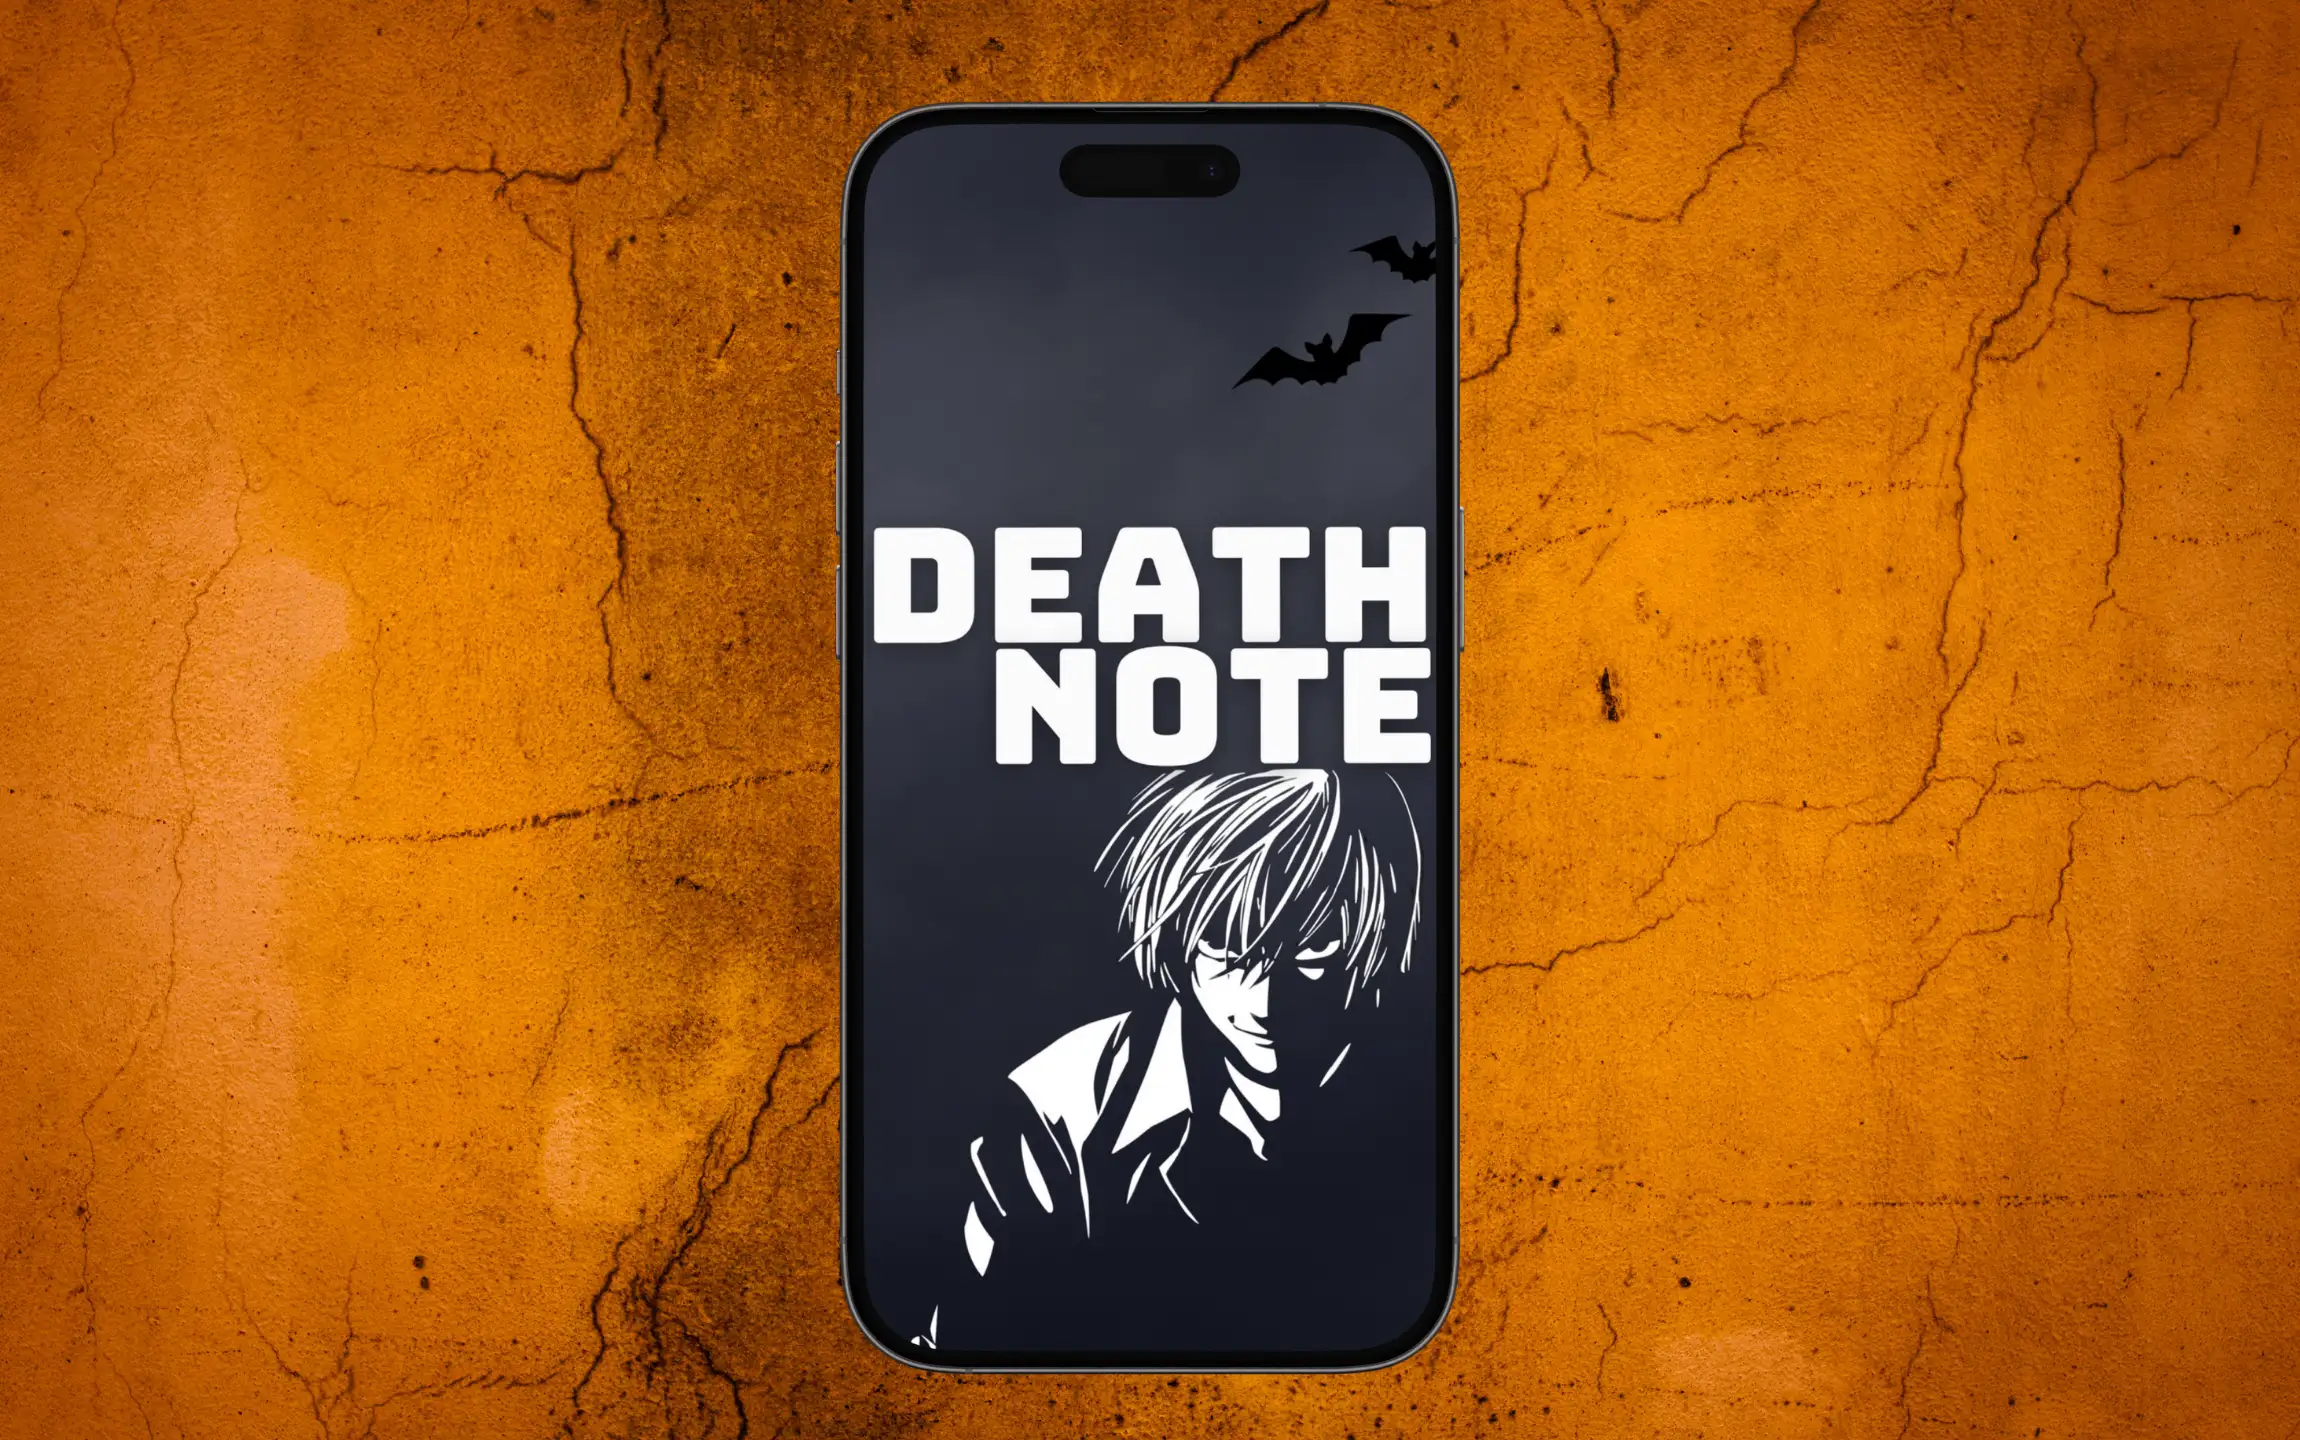 Death Note Anime Backgrounds wallpaper for iPhone